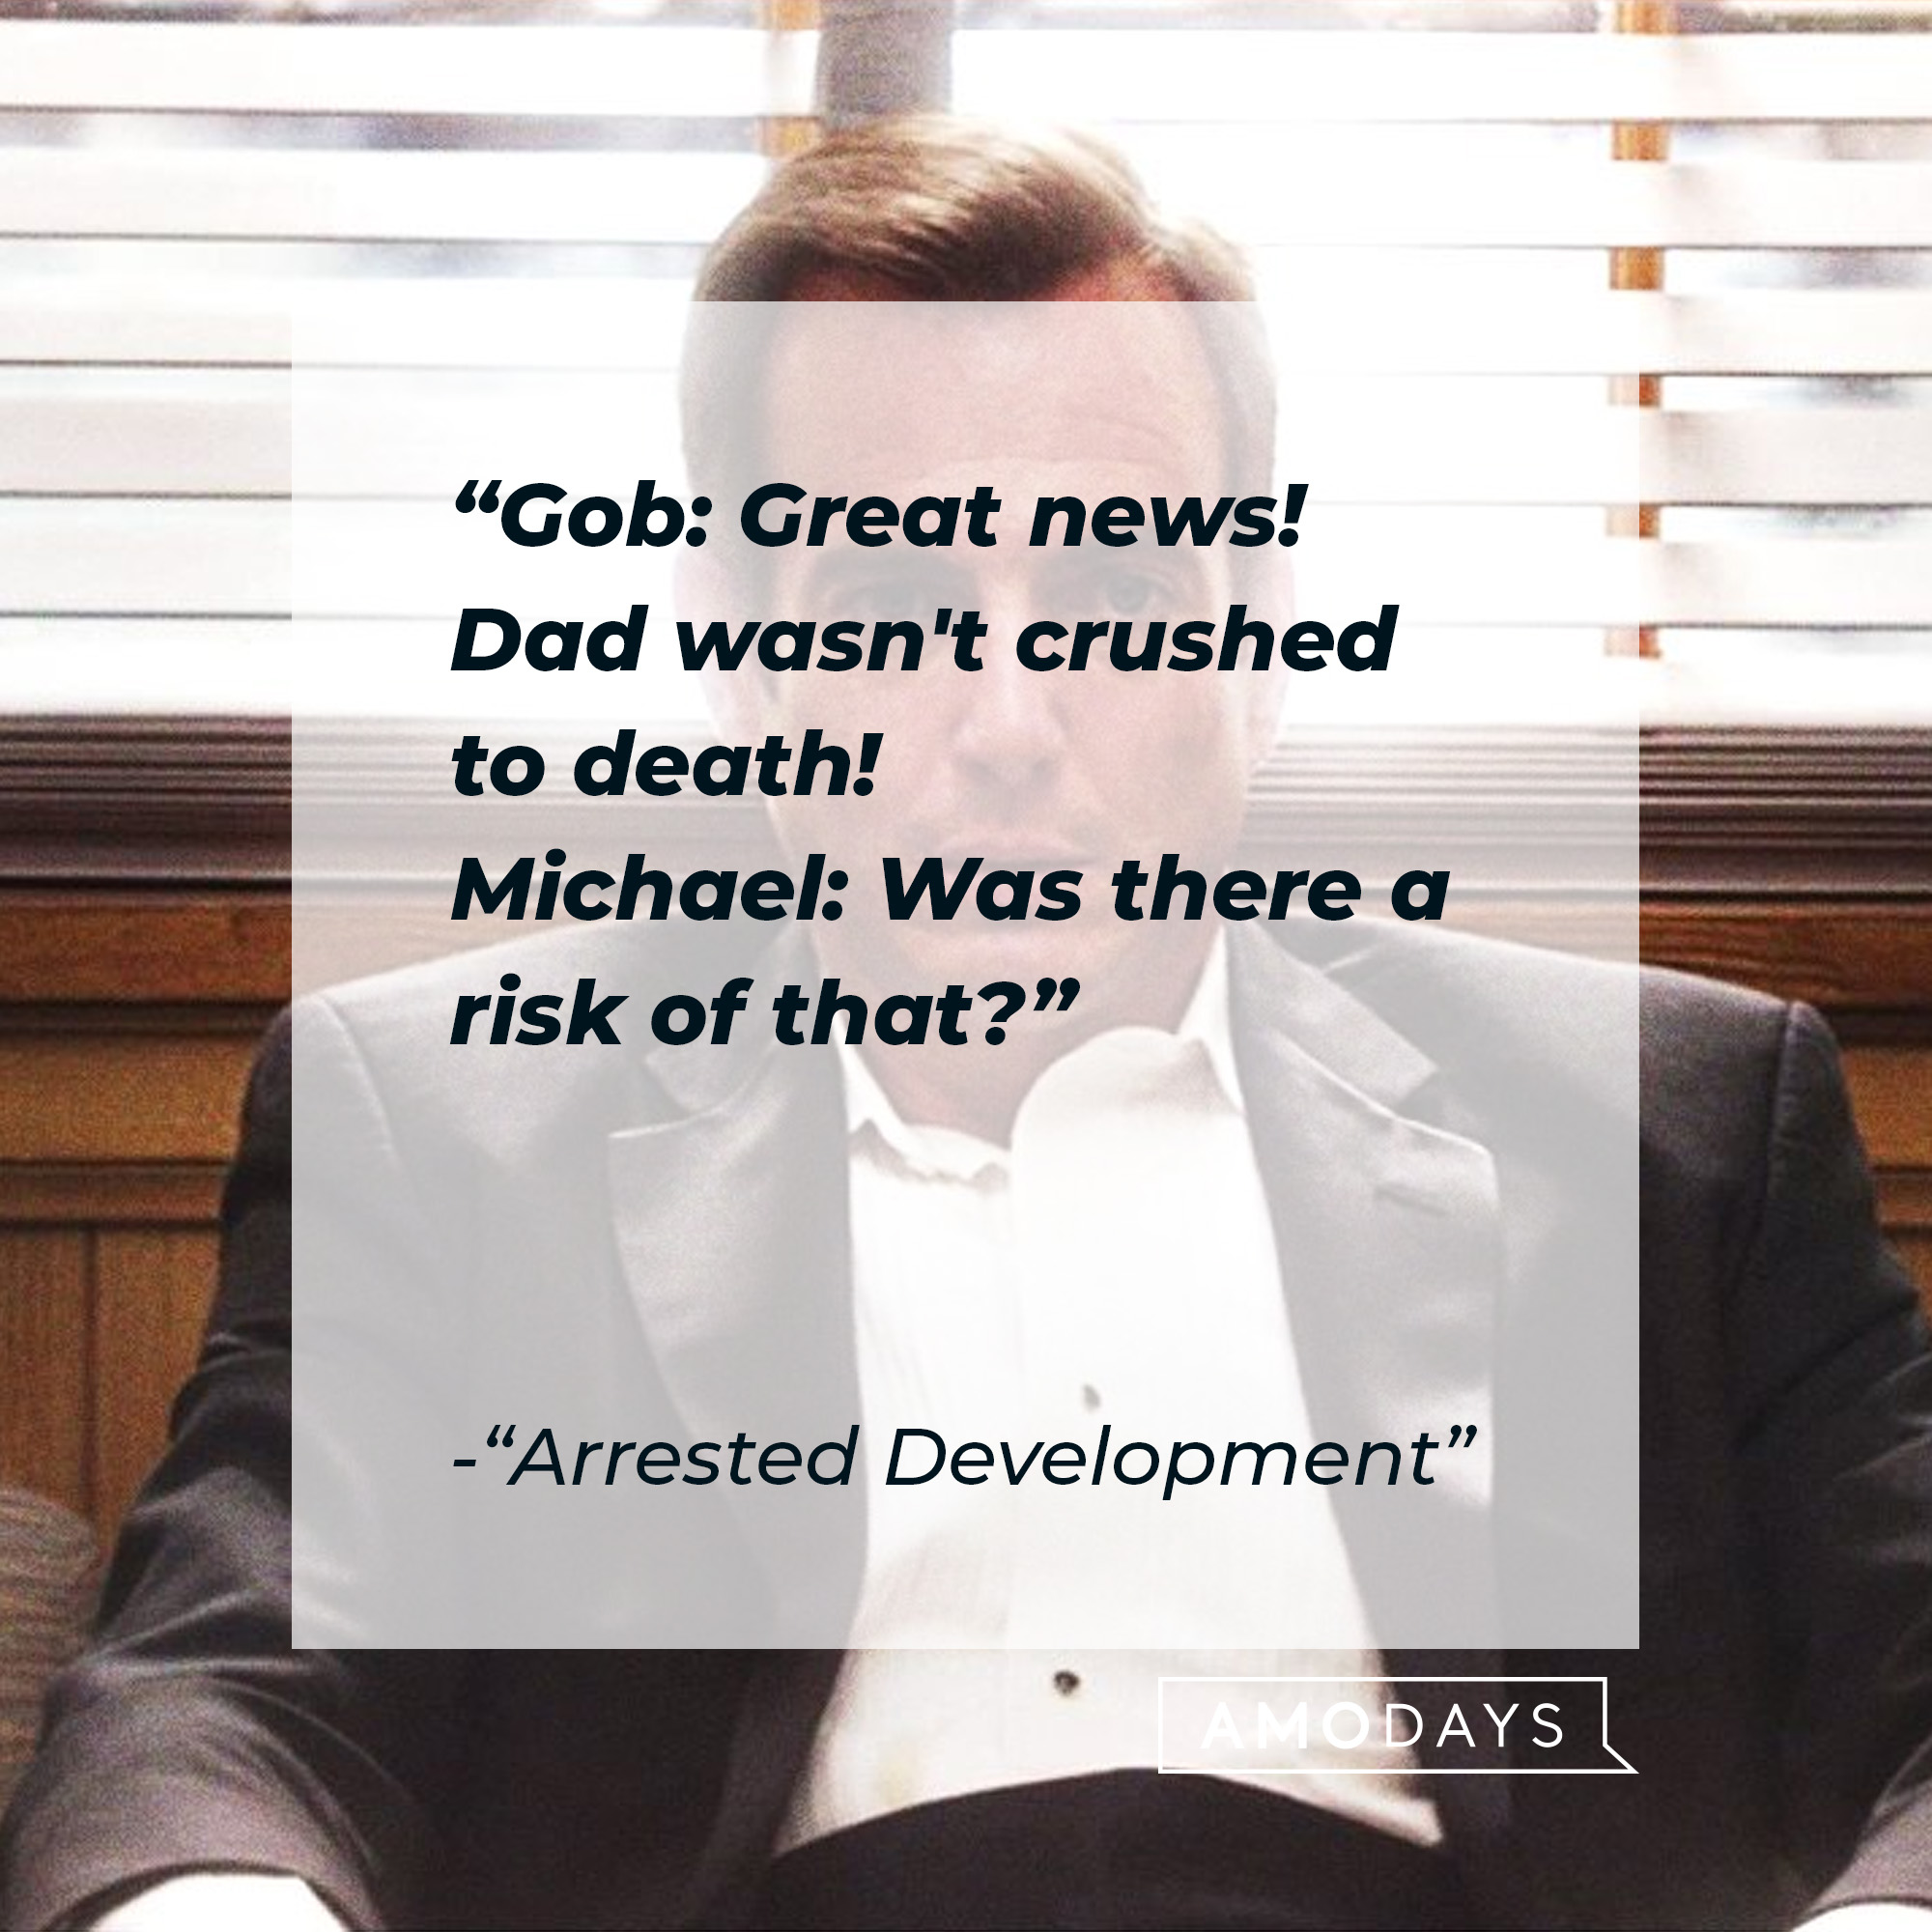 Quote from "Arrested Development:" "Gob: Great news! Dad wasn't crushed to death! Michael: Was there a risk of that?" | Source: facebook.com/ArrestedDevelopment